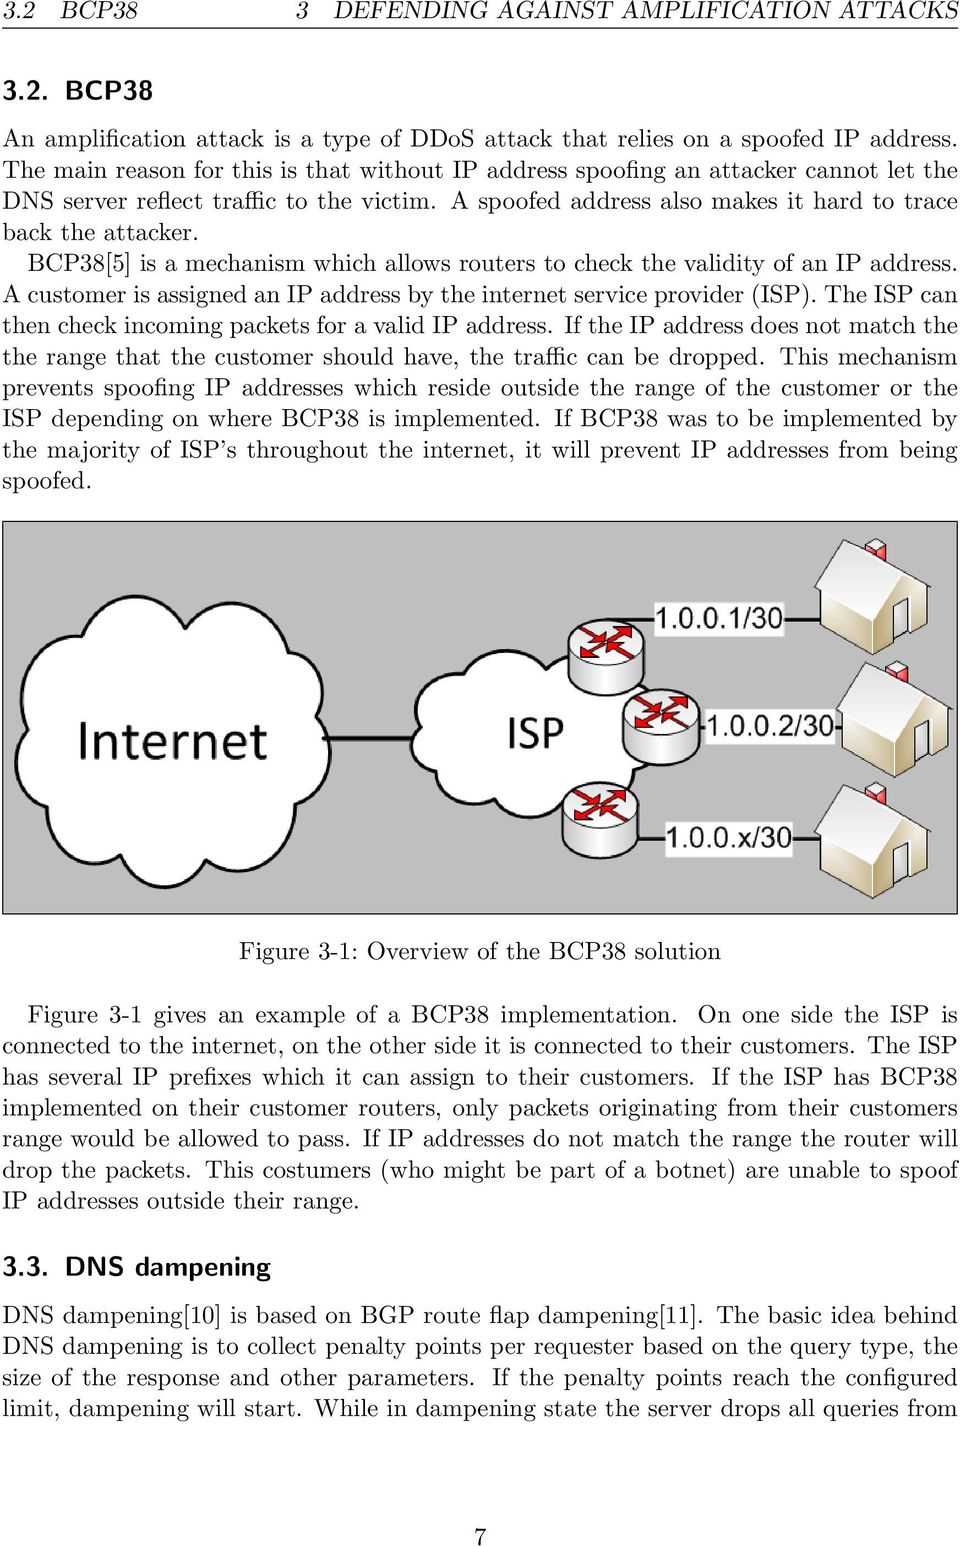 BCP38[5] is a mechanism which allows routers to check the validity of an IP address. A customer is assigned an IP address by the internet service provider (ISP).